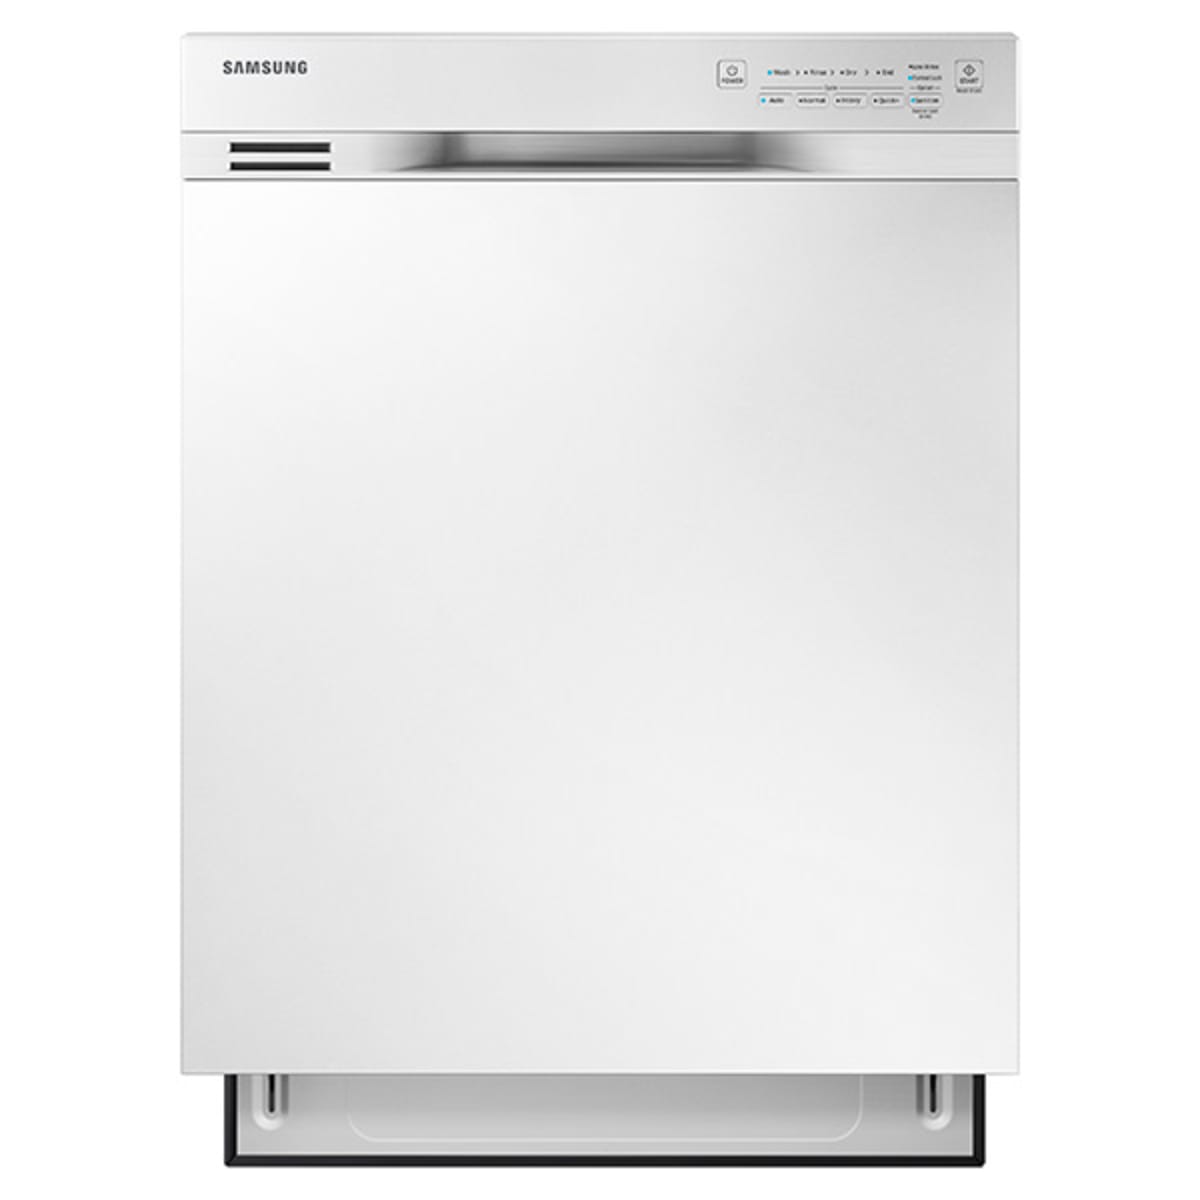 Dishwashers Reviews, Features, and Deals - Reviewed